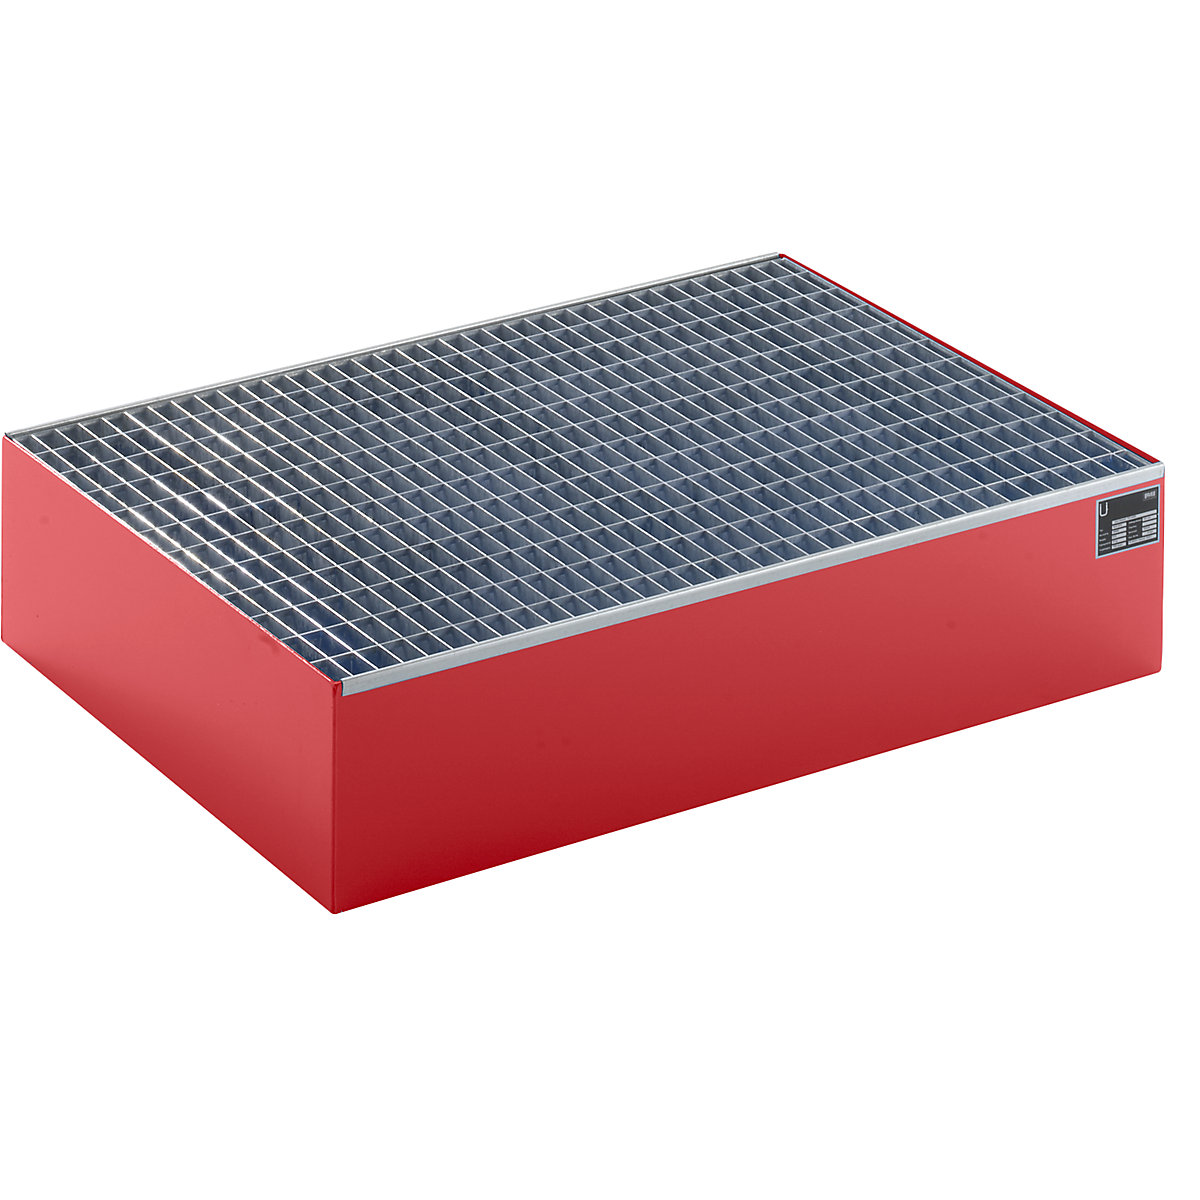 EUROKRAFTbasic – Pallet sump tray, LxWxH 1200 x 800 x 260 mm, red RAL 3000, with grate